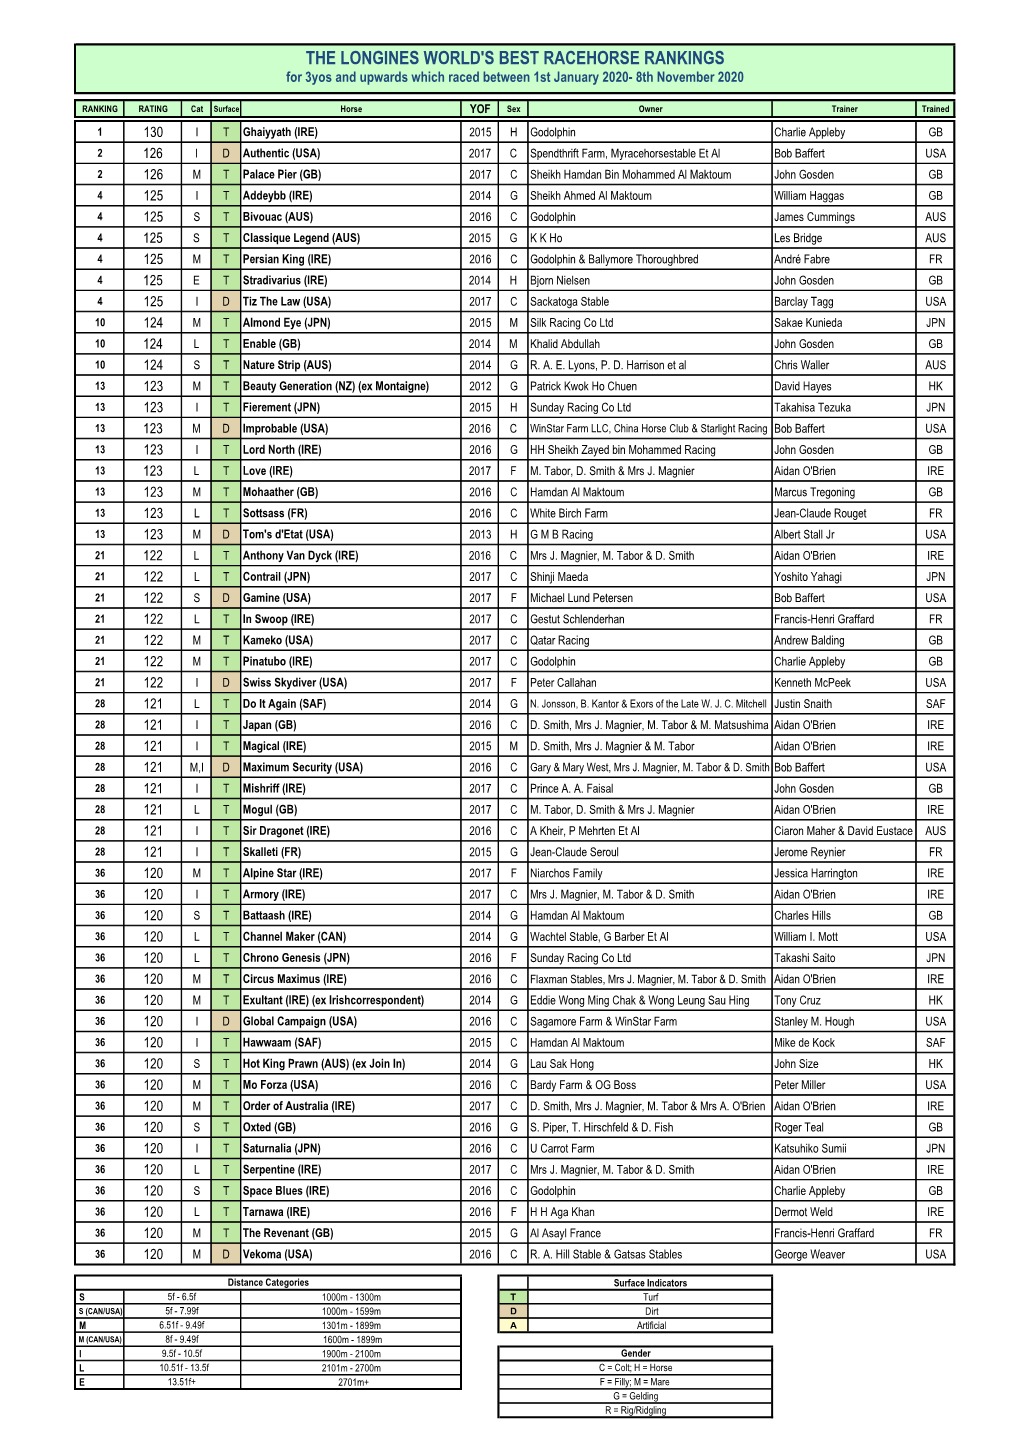 THE LONGINES WORLD's BEST RACEHORSE RANKINGS for 3Yos and Upwards Which Raced Between 1St January 2020- 8Th November 2020